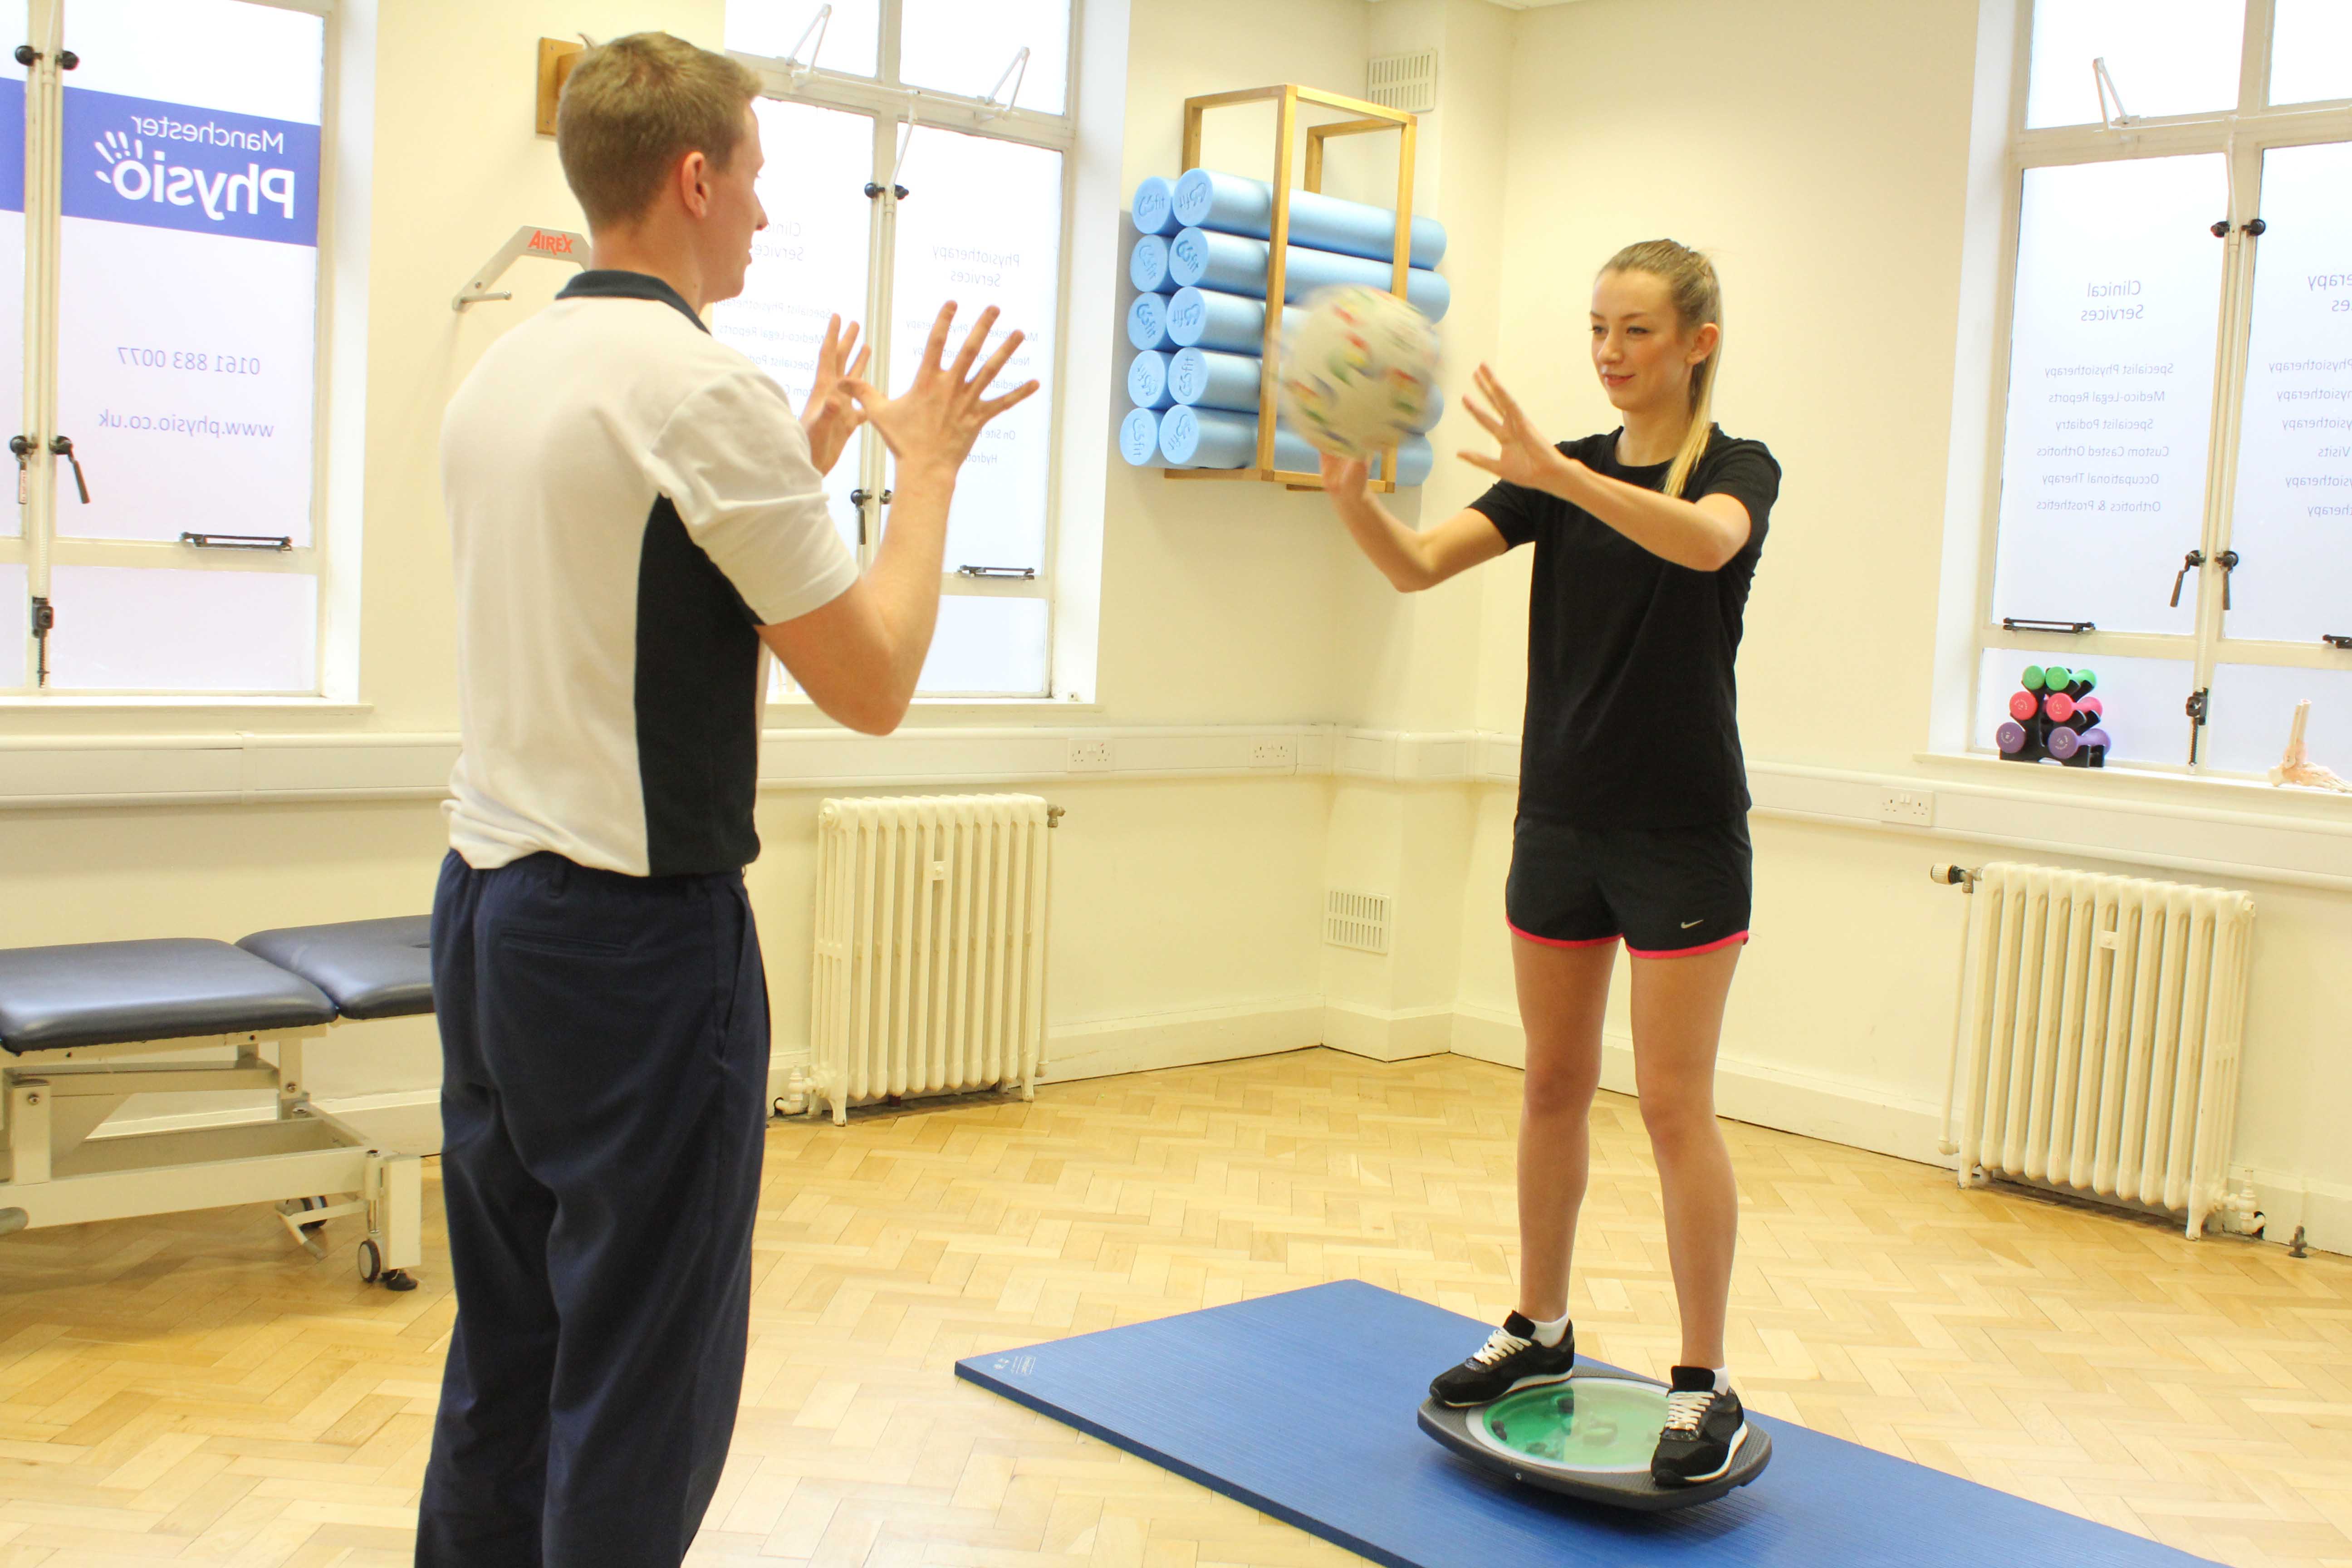 Dynamic balance exercises assisted by a specilaist physiotherapist